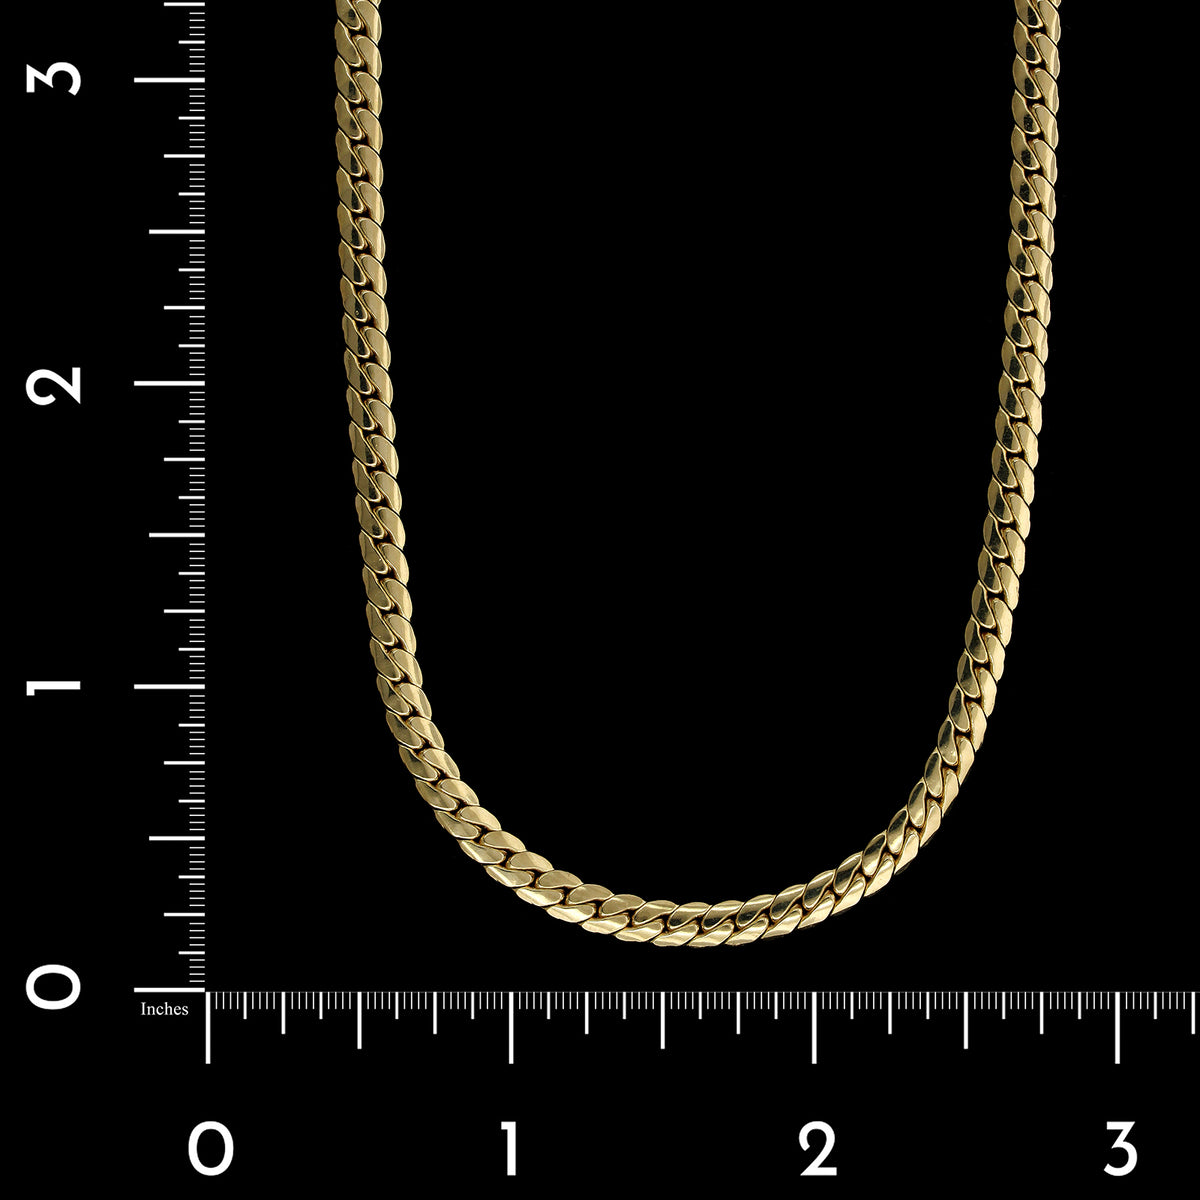 14K Yellow Gold Estate Flat Curb Link Chain Necklace